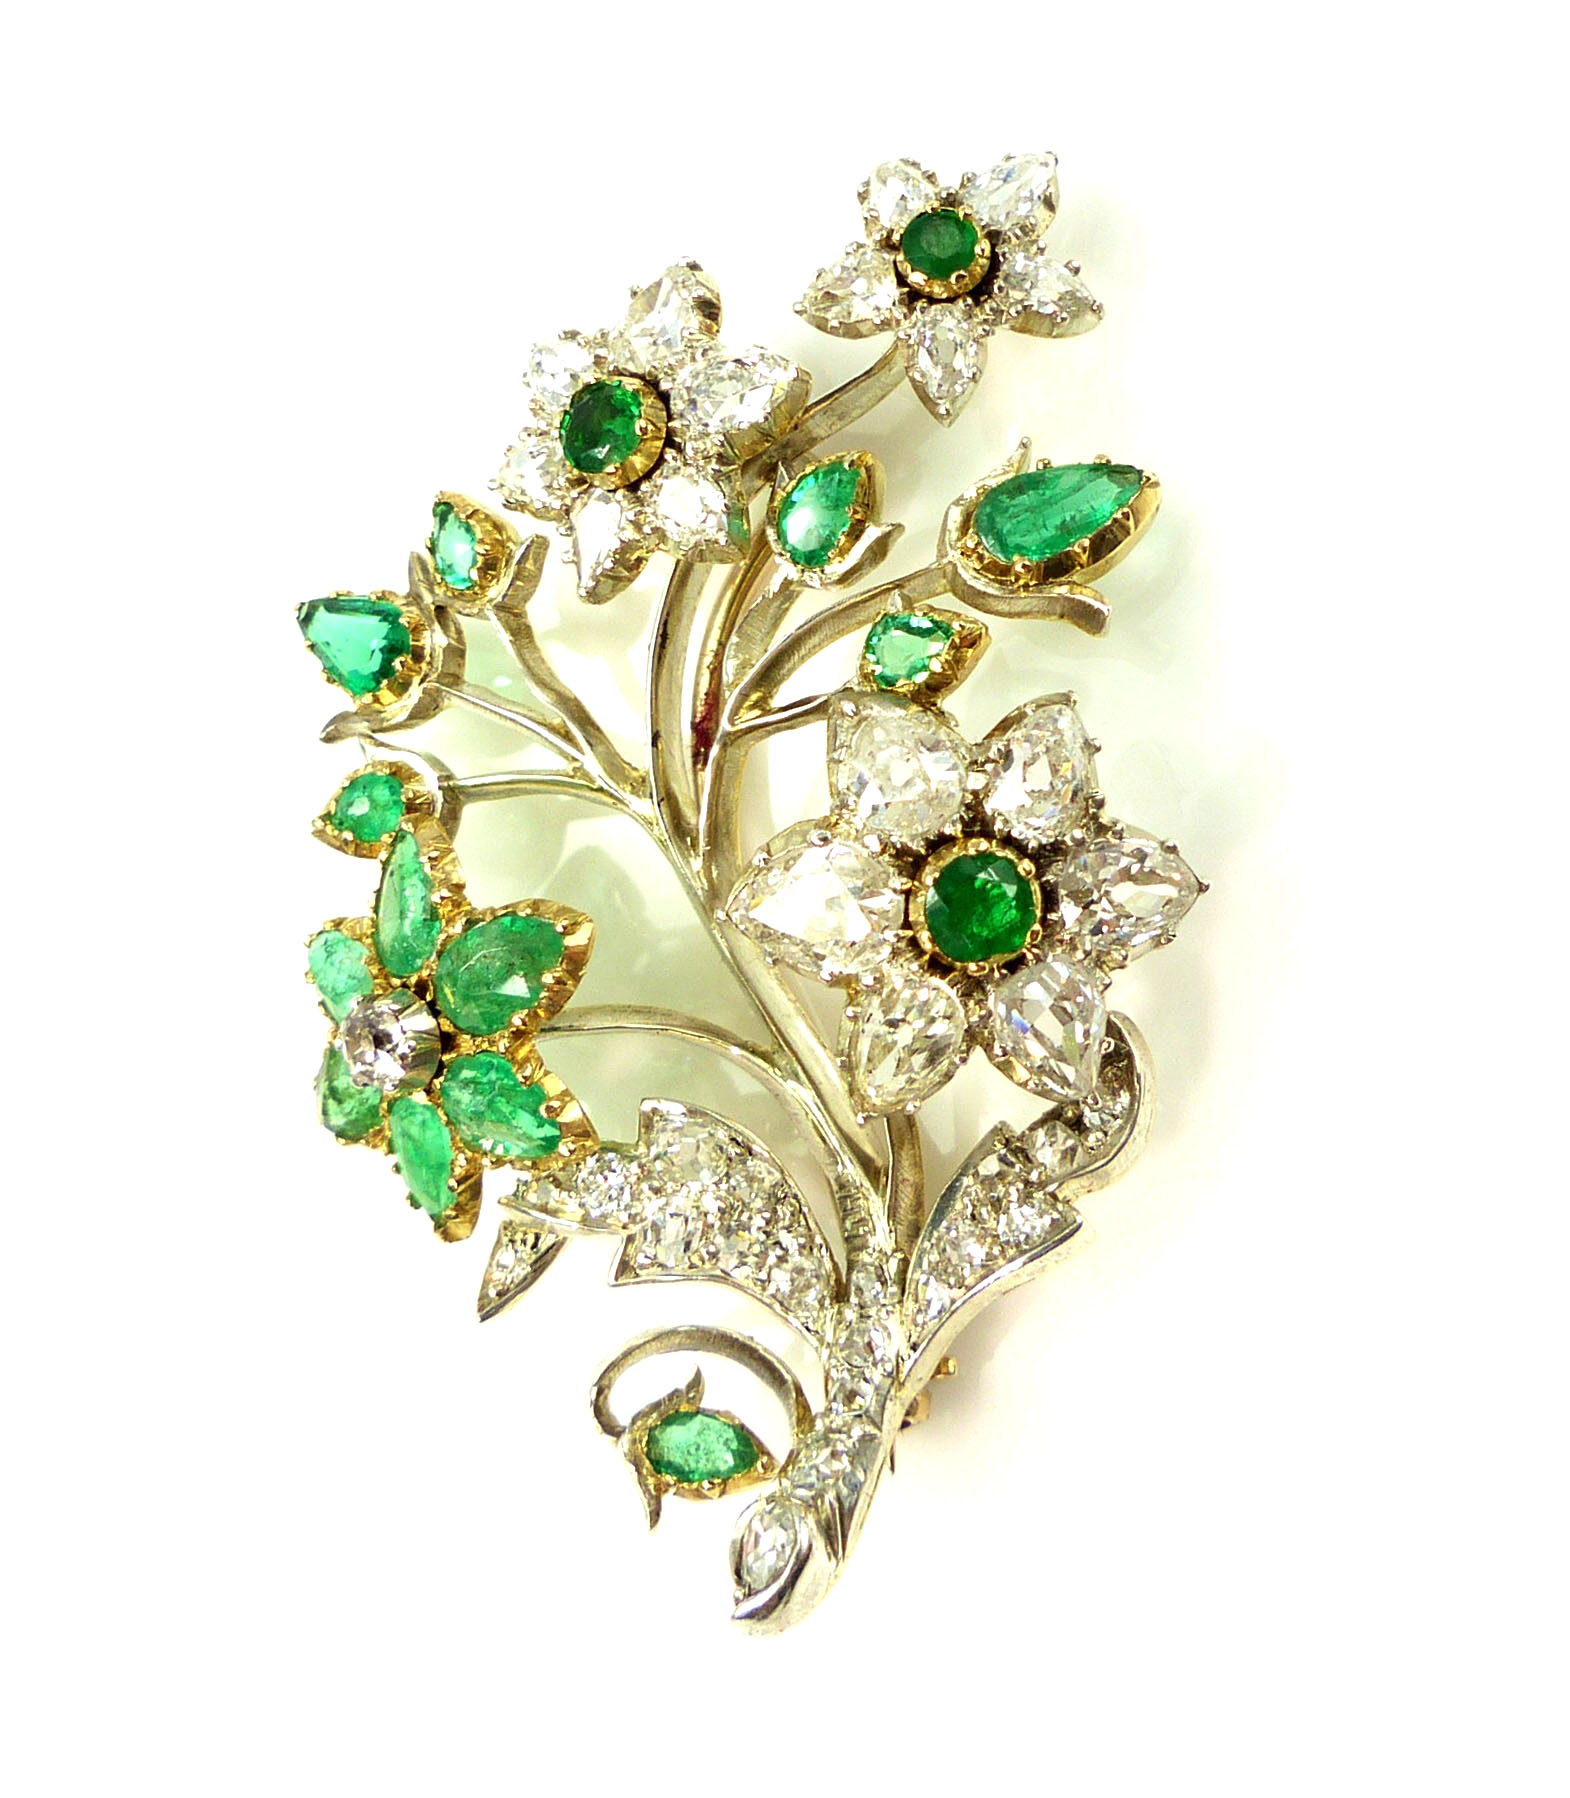 An antique diamond and emerald brooch in high carat yellow gold, - Image 9 of 10